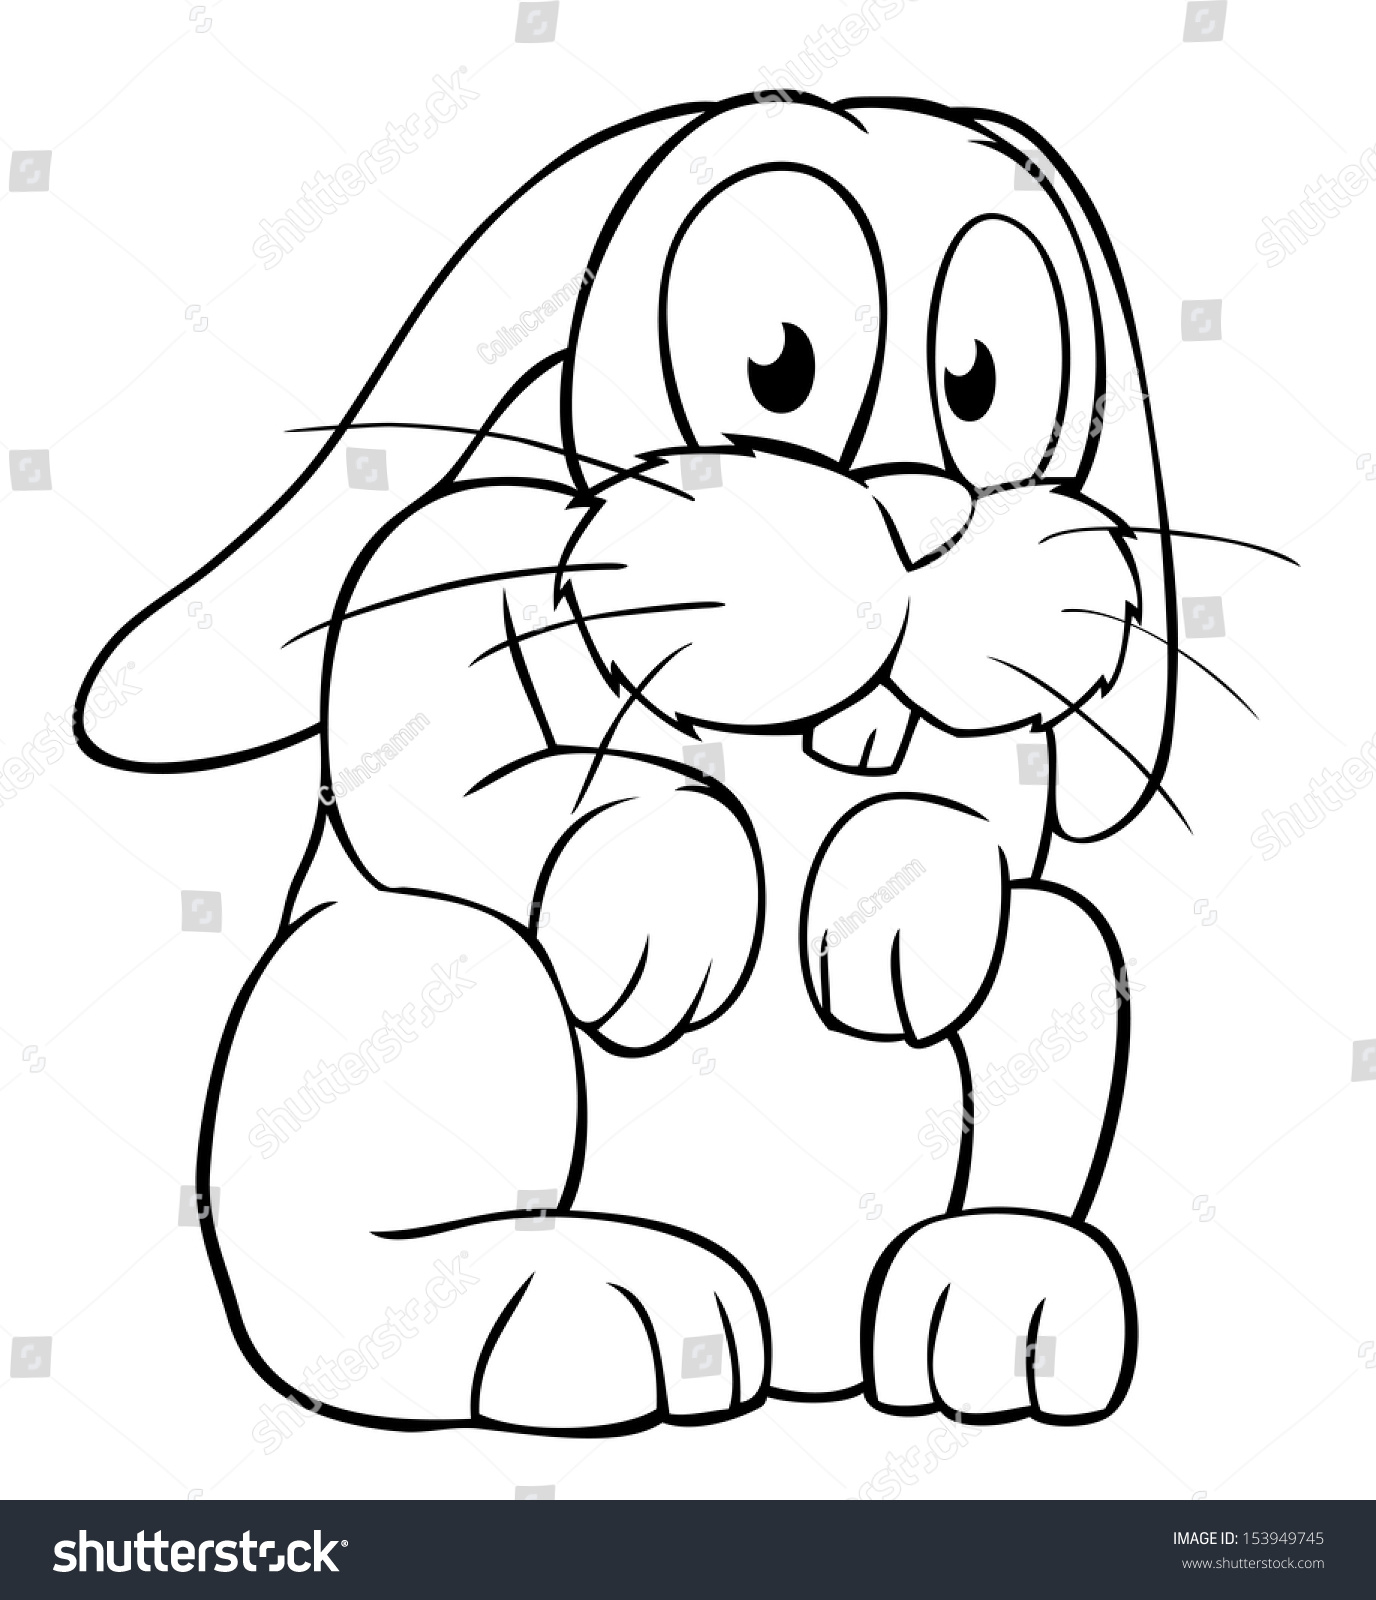 Cute Black And White Cartoon Rabbit Looking Scared. Stock Photo